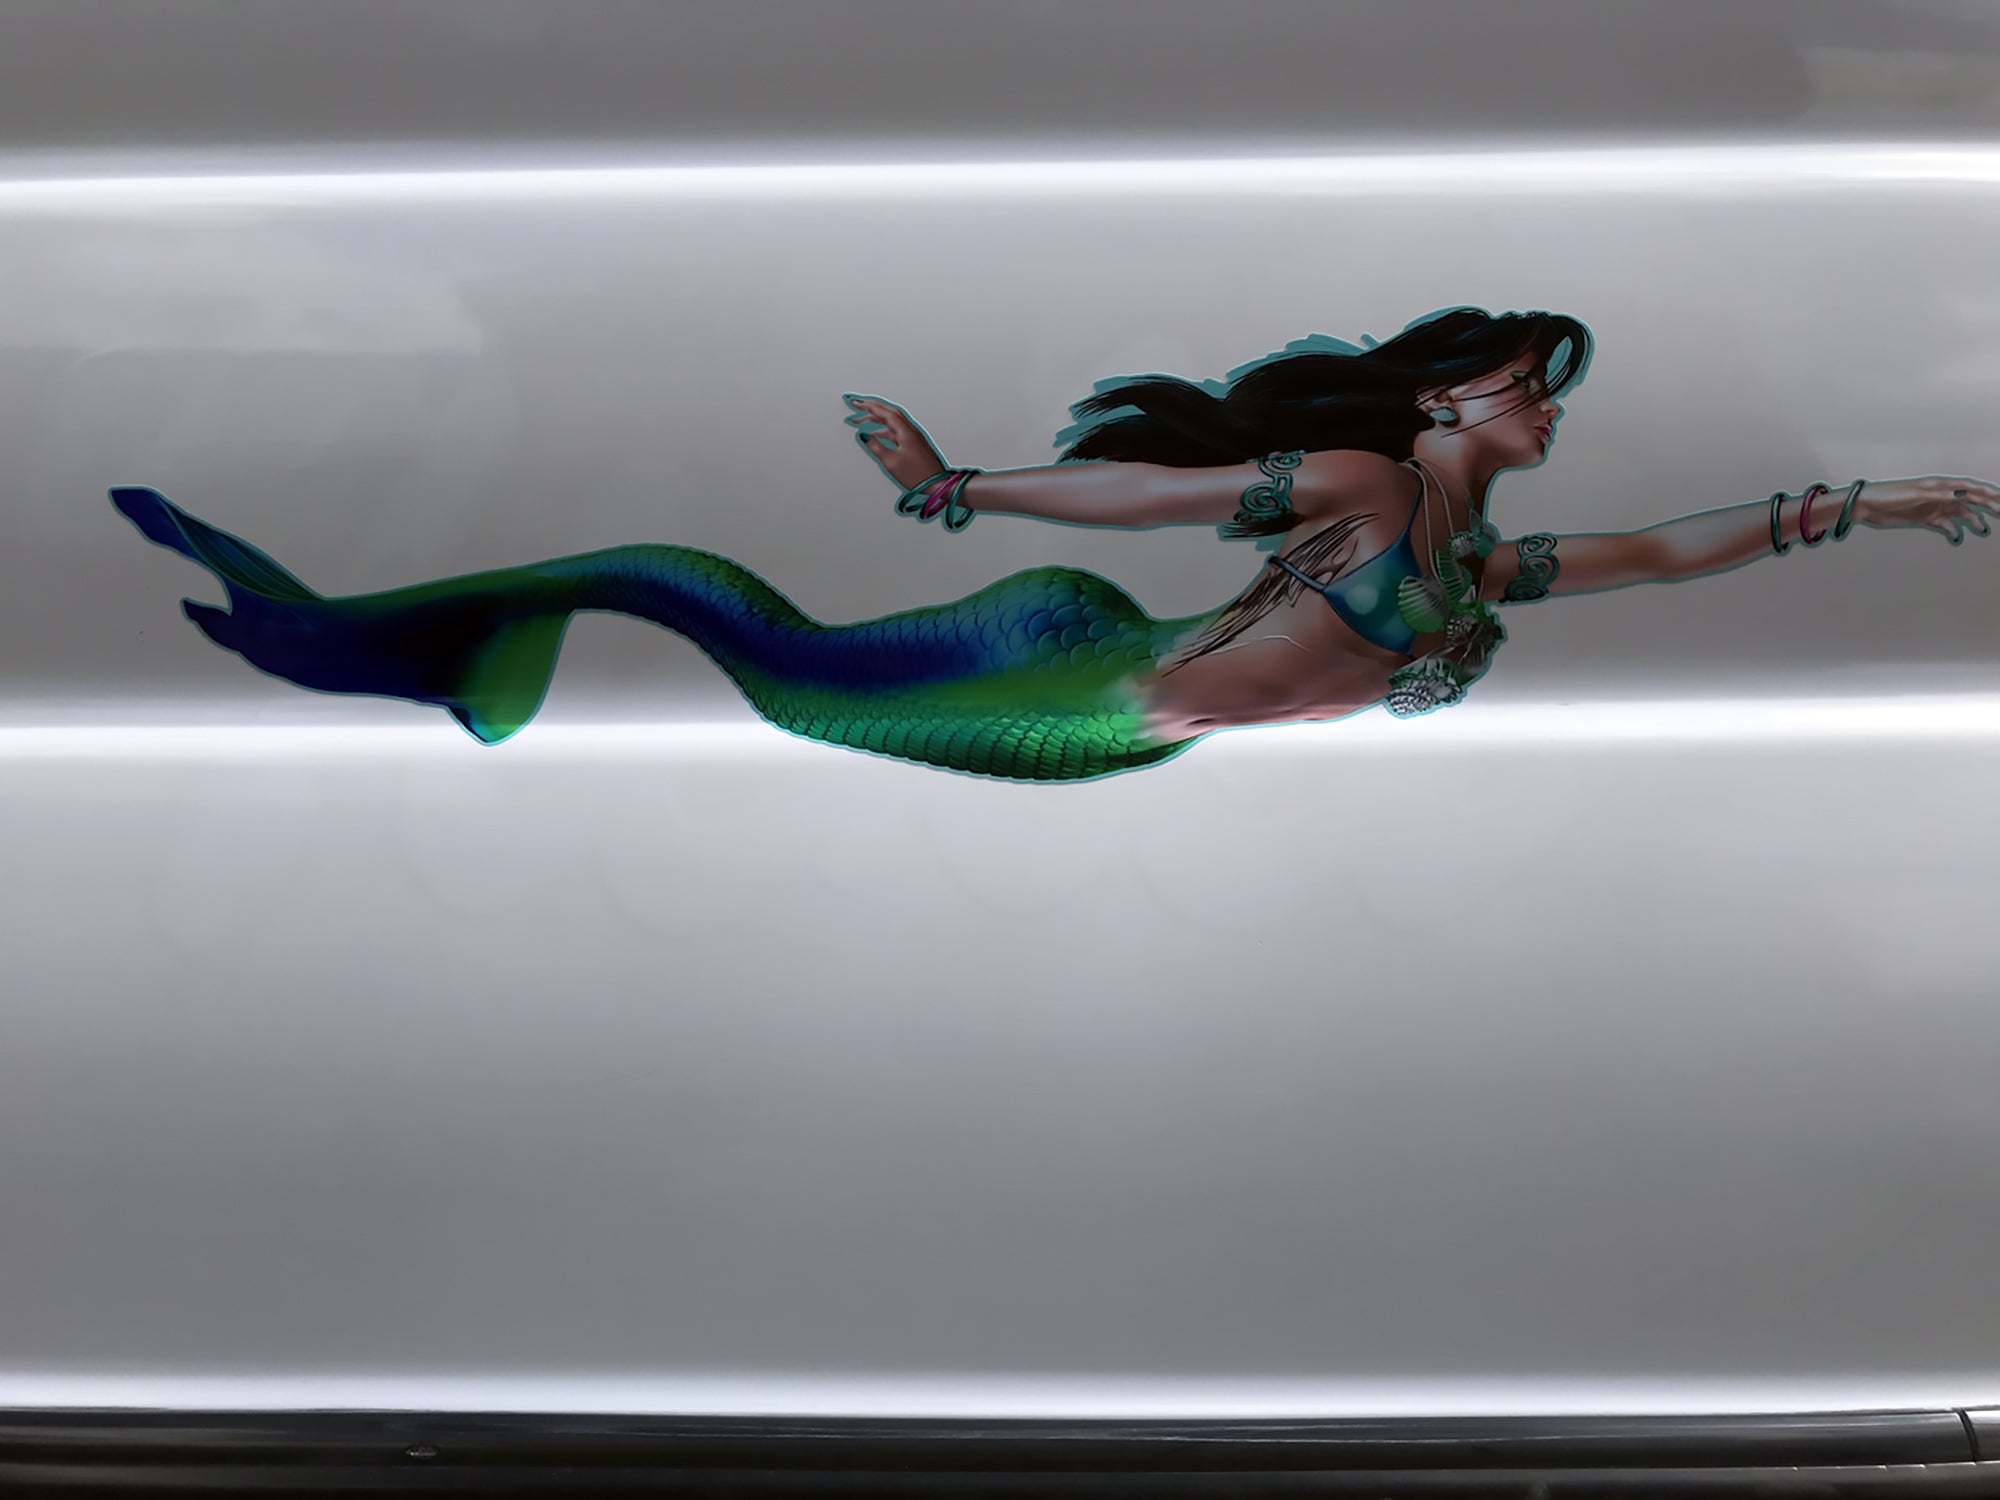 mermaid decal on the side of customer white boat